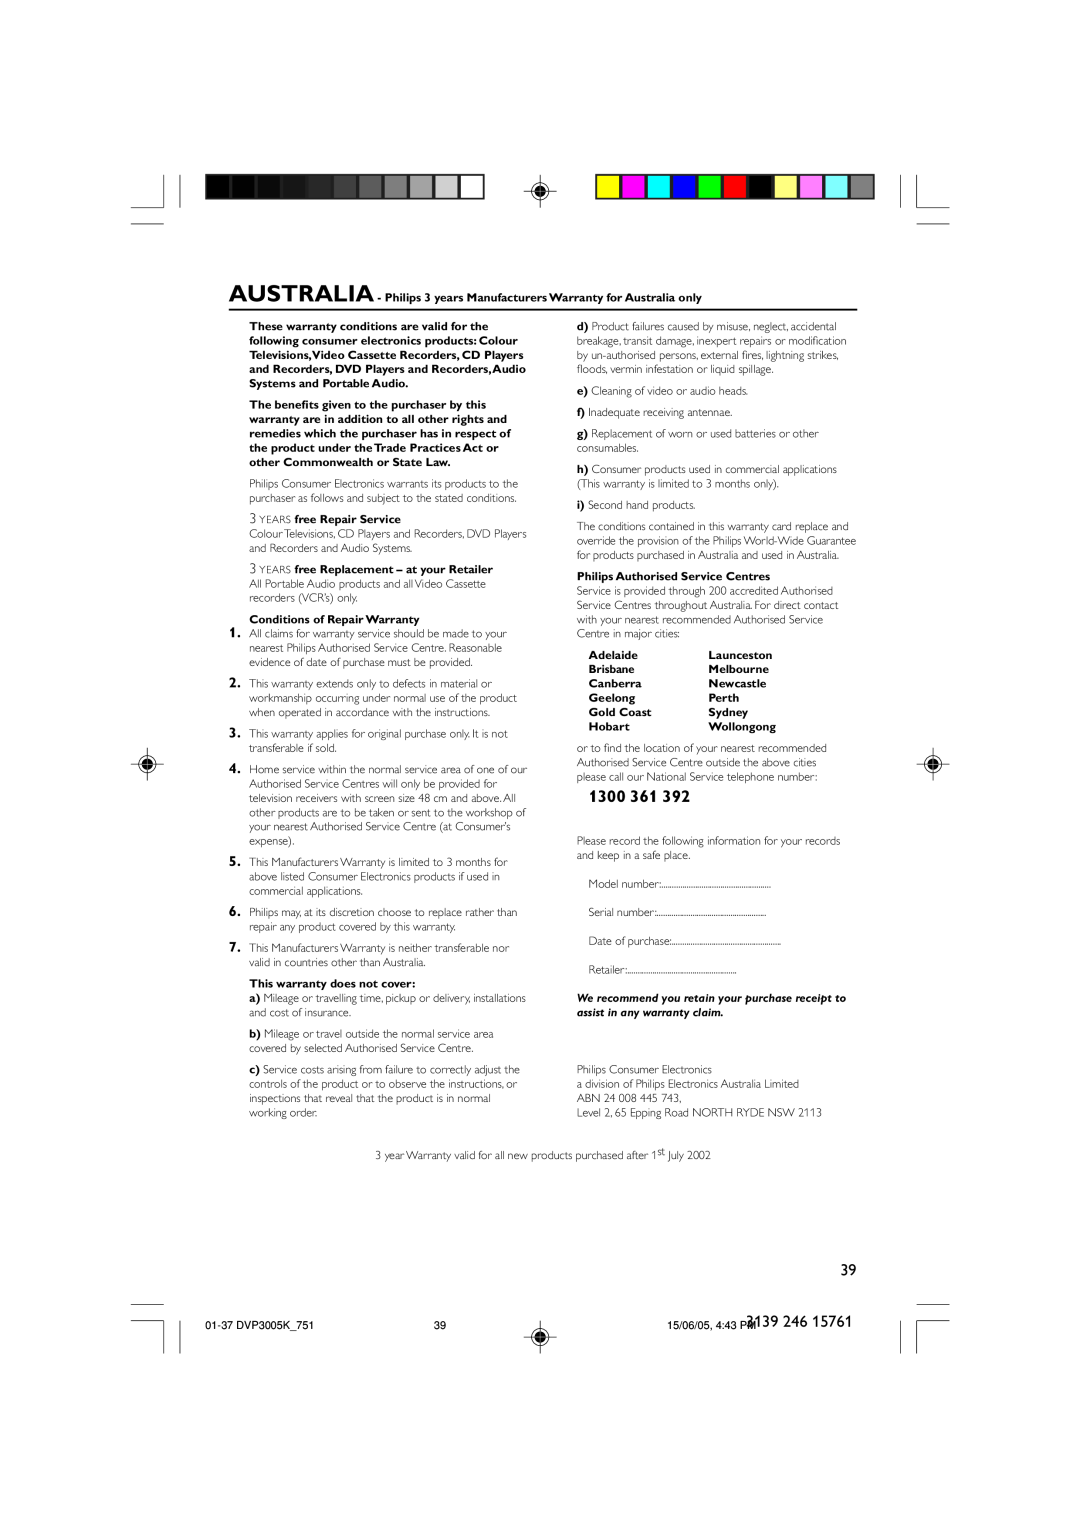 Philips DVP3005K/74 user manual 1300 361, AUSTRALIA - Philips 3 years Manufacturers Warranty for Australia only 